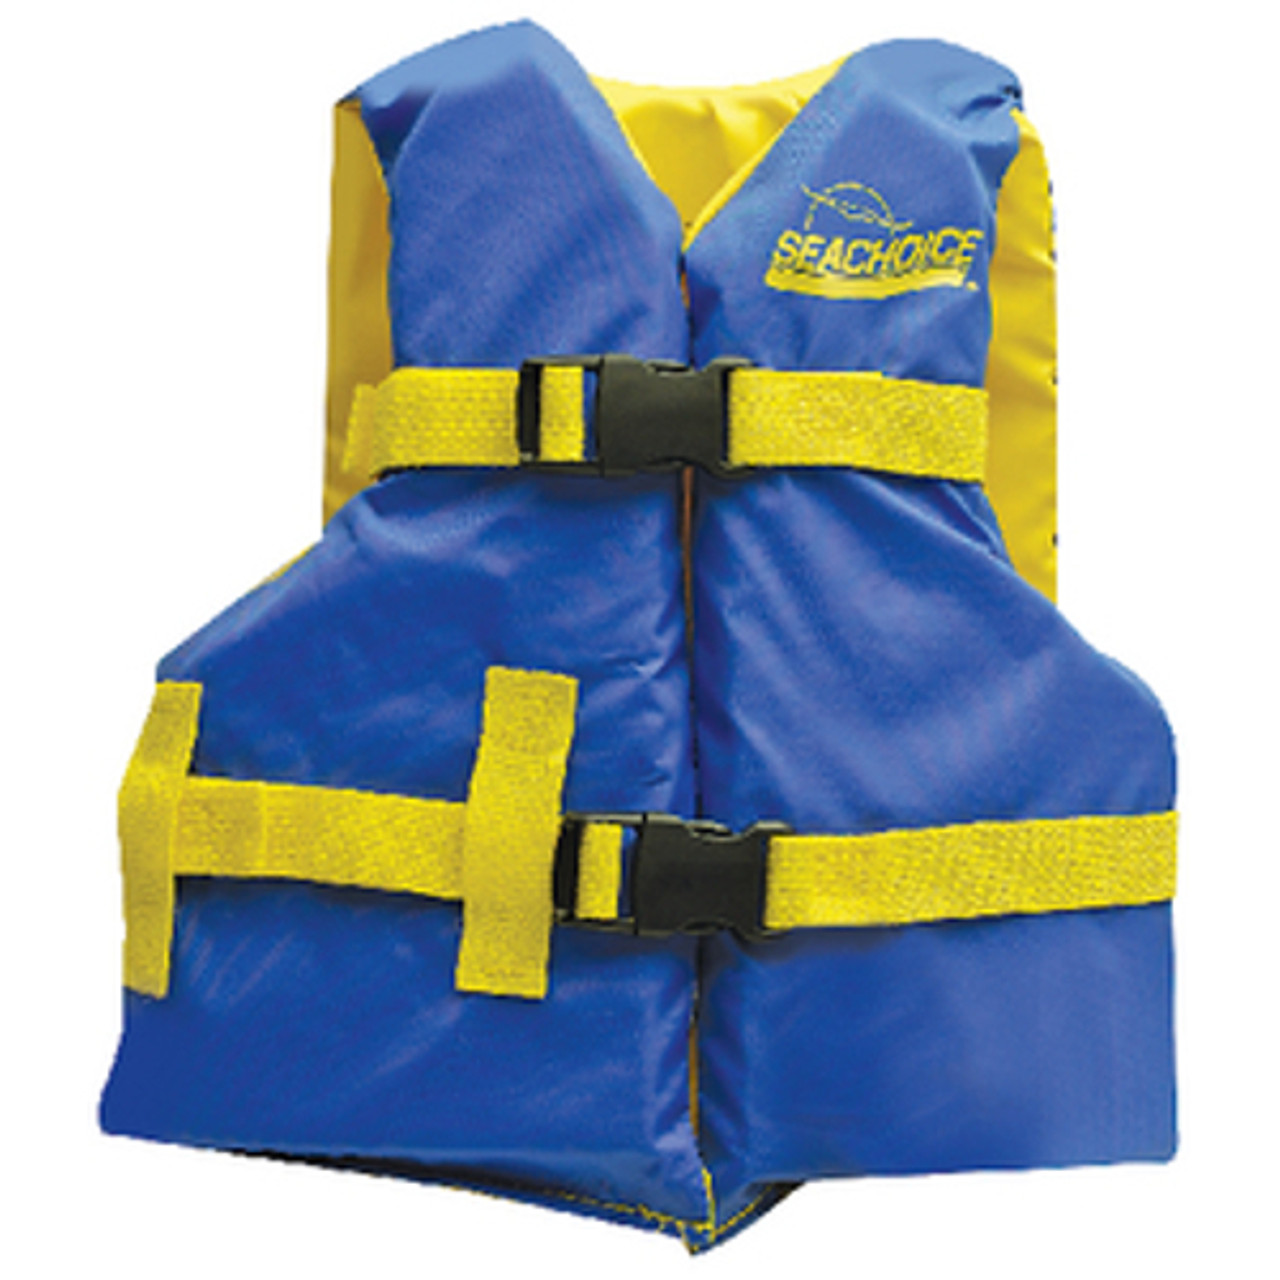 Seachoice Blue and Yellow Youth Sized Type III PFD Safety, Life & Ski Vest for Boats